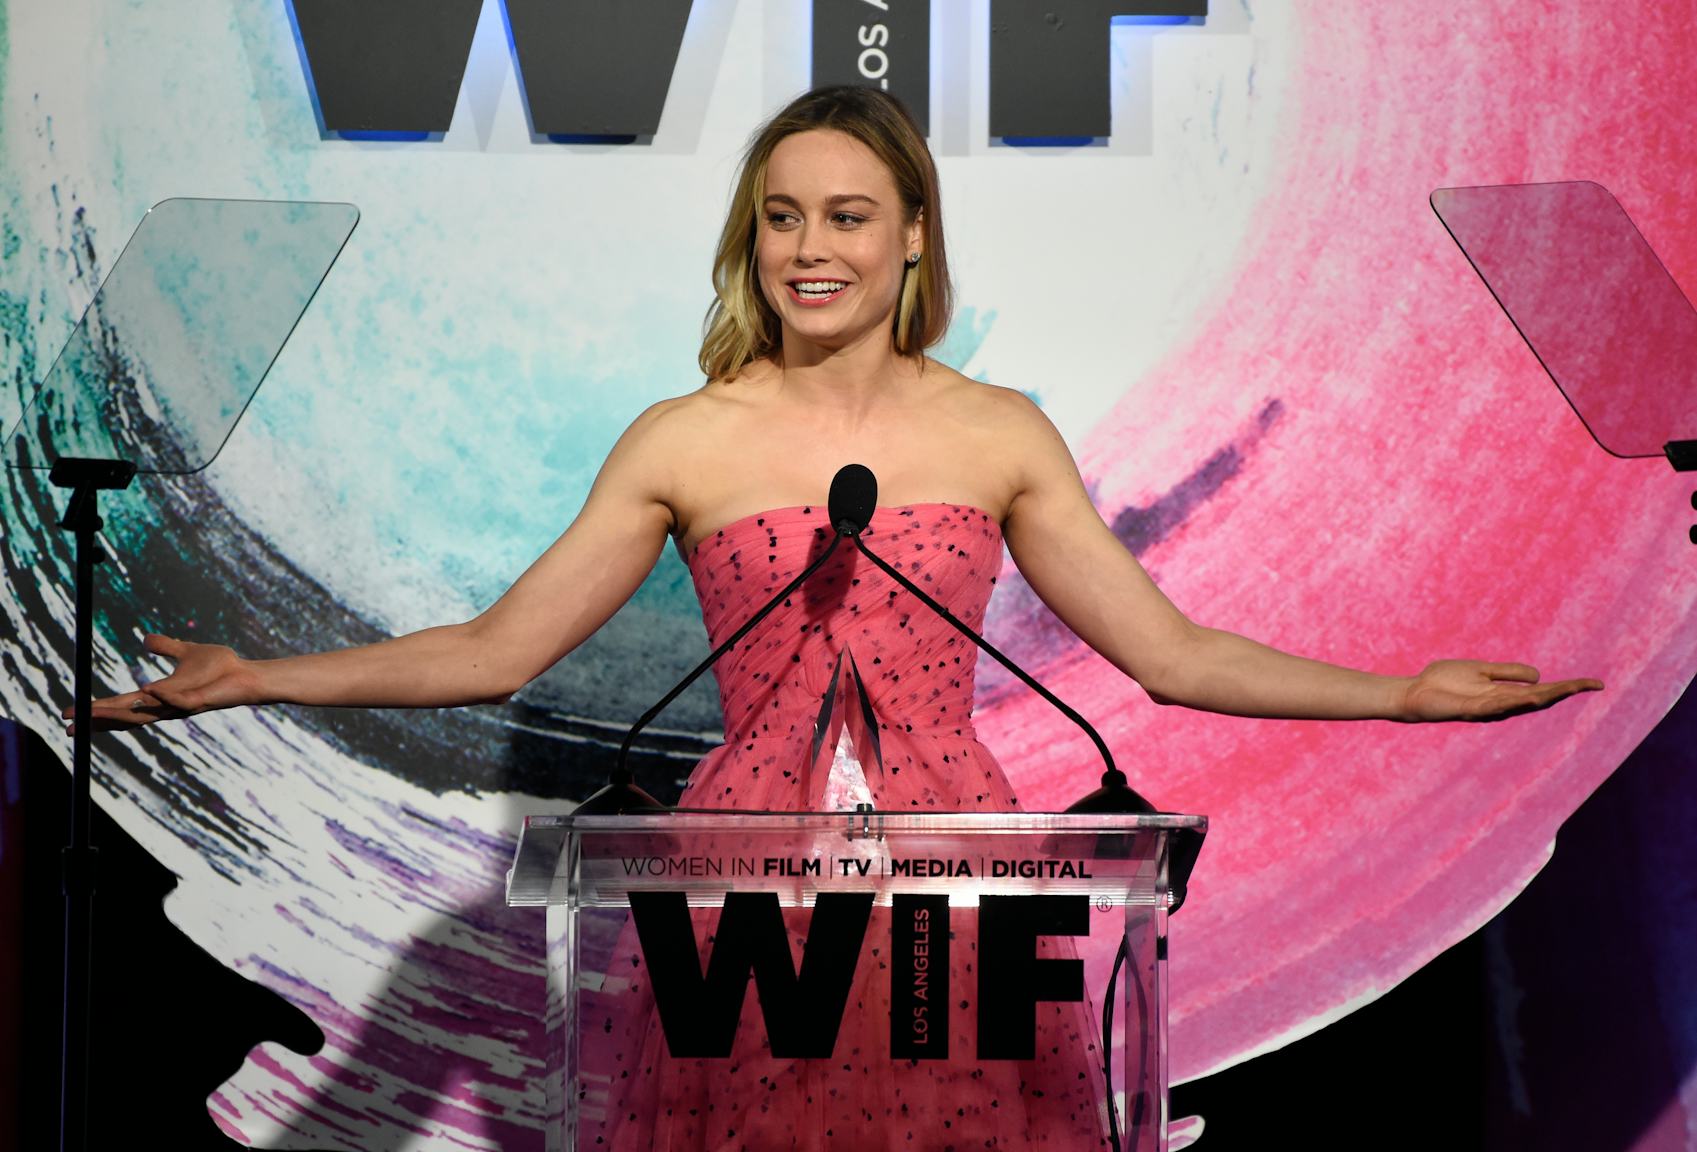 Marvel just released the first image of Brie Larson as Captain Marvel